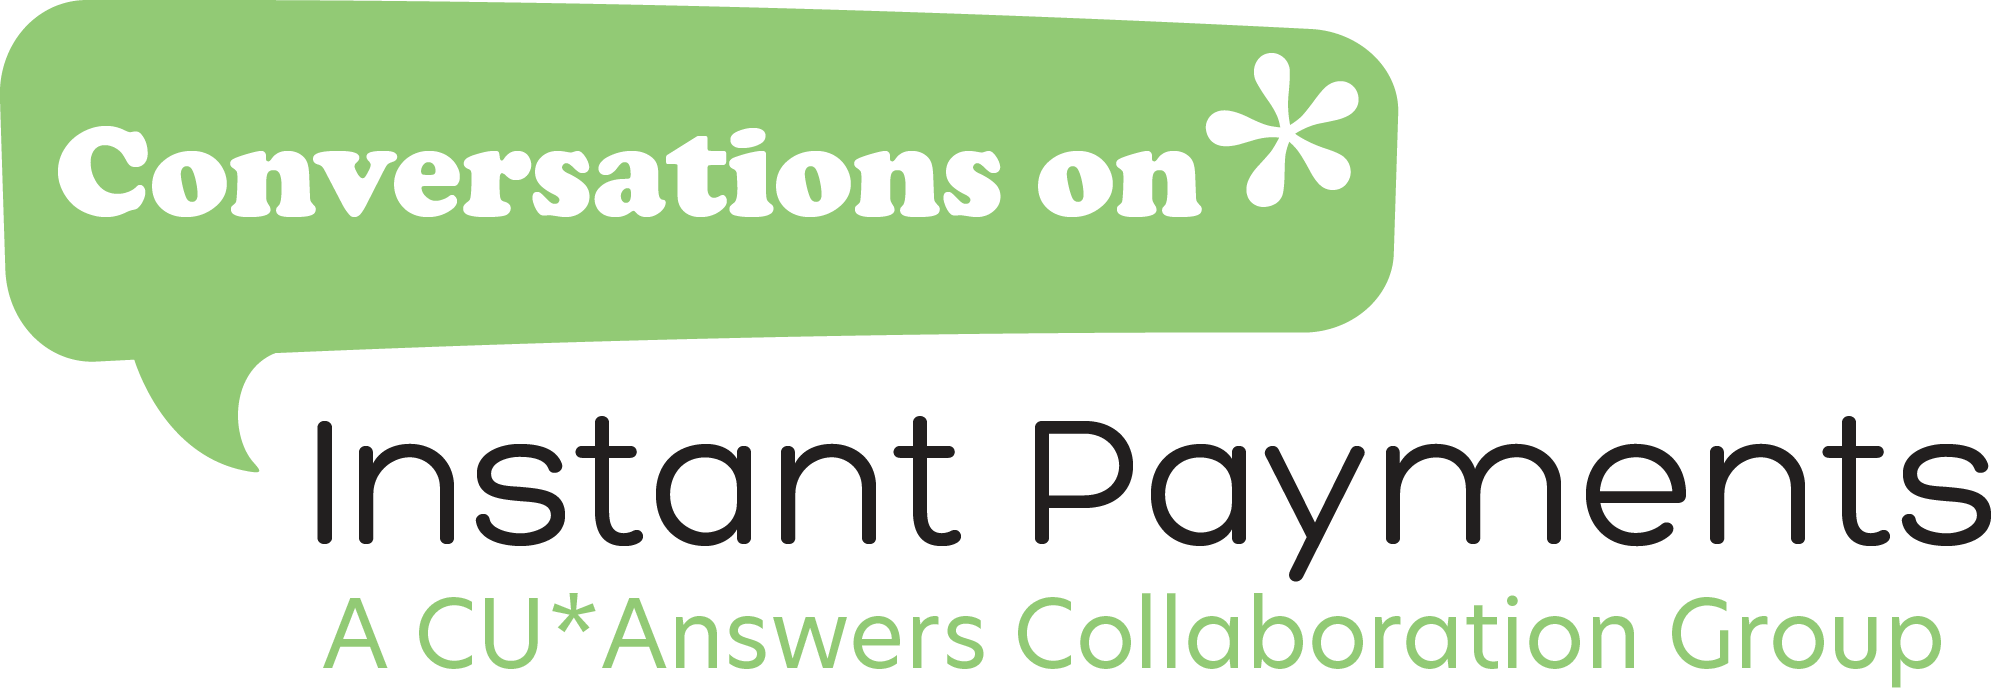 Conversation on instant payments